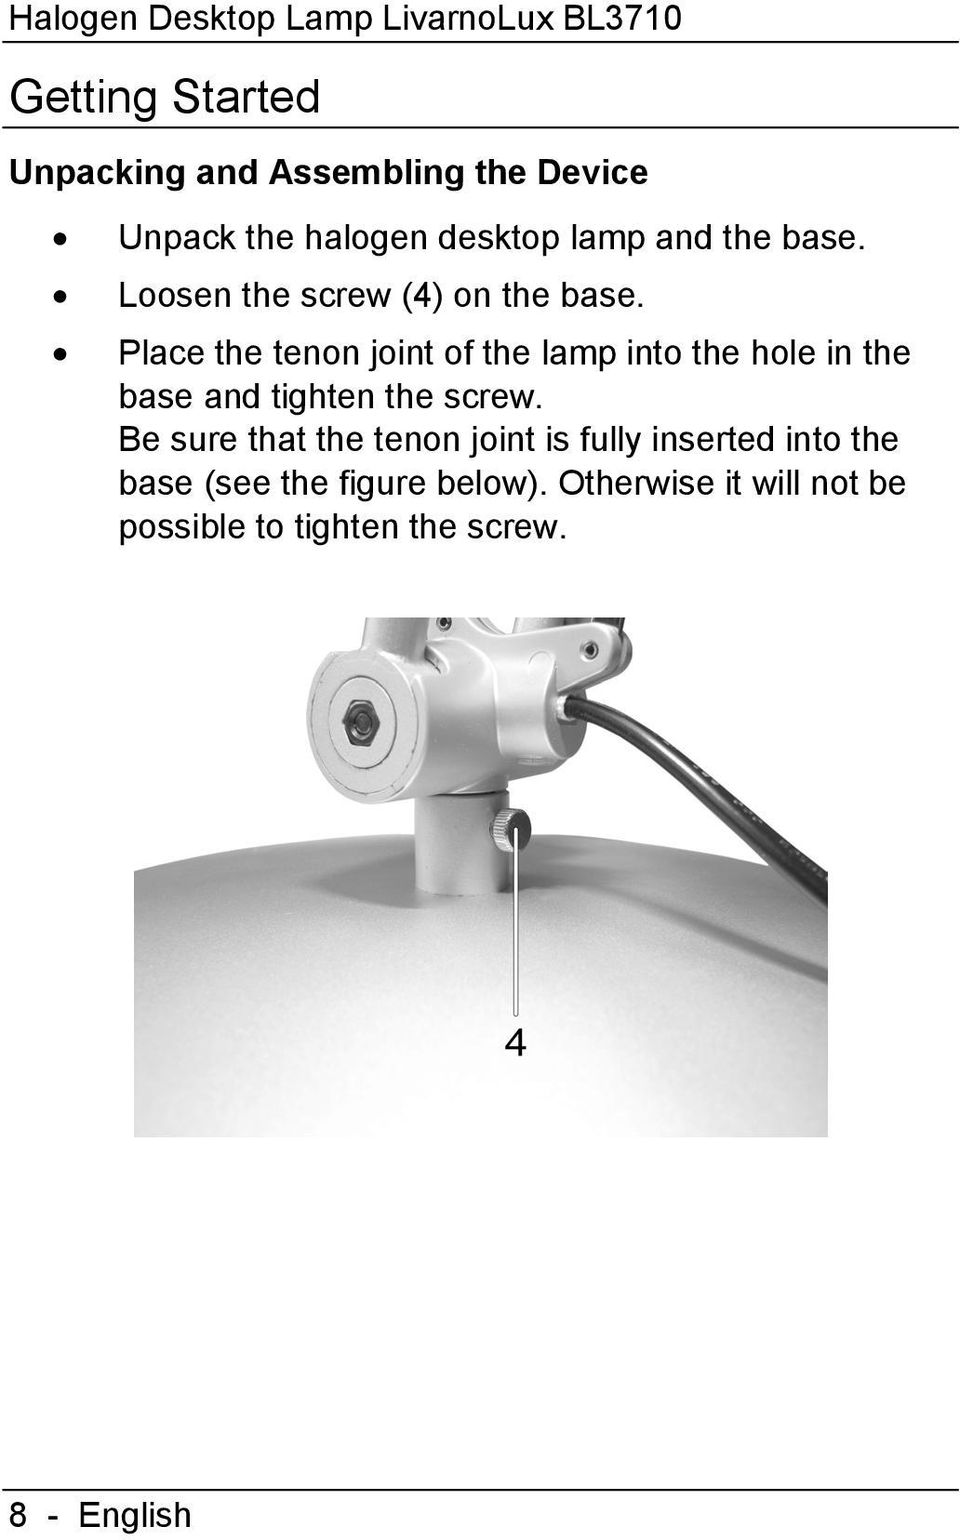 Place the tenon joint of the lamp into the hole in the base and tighten the screw.